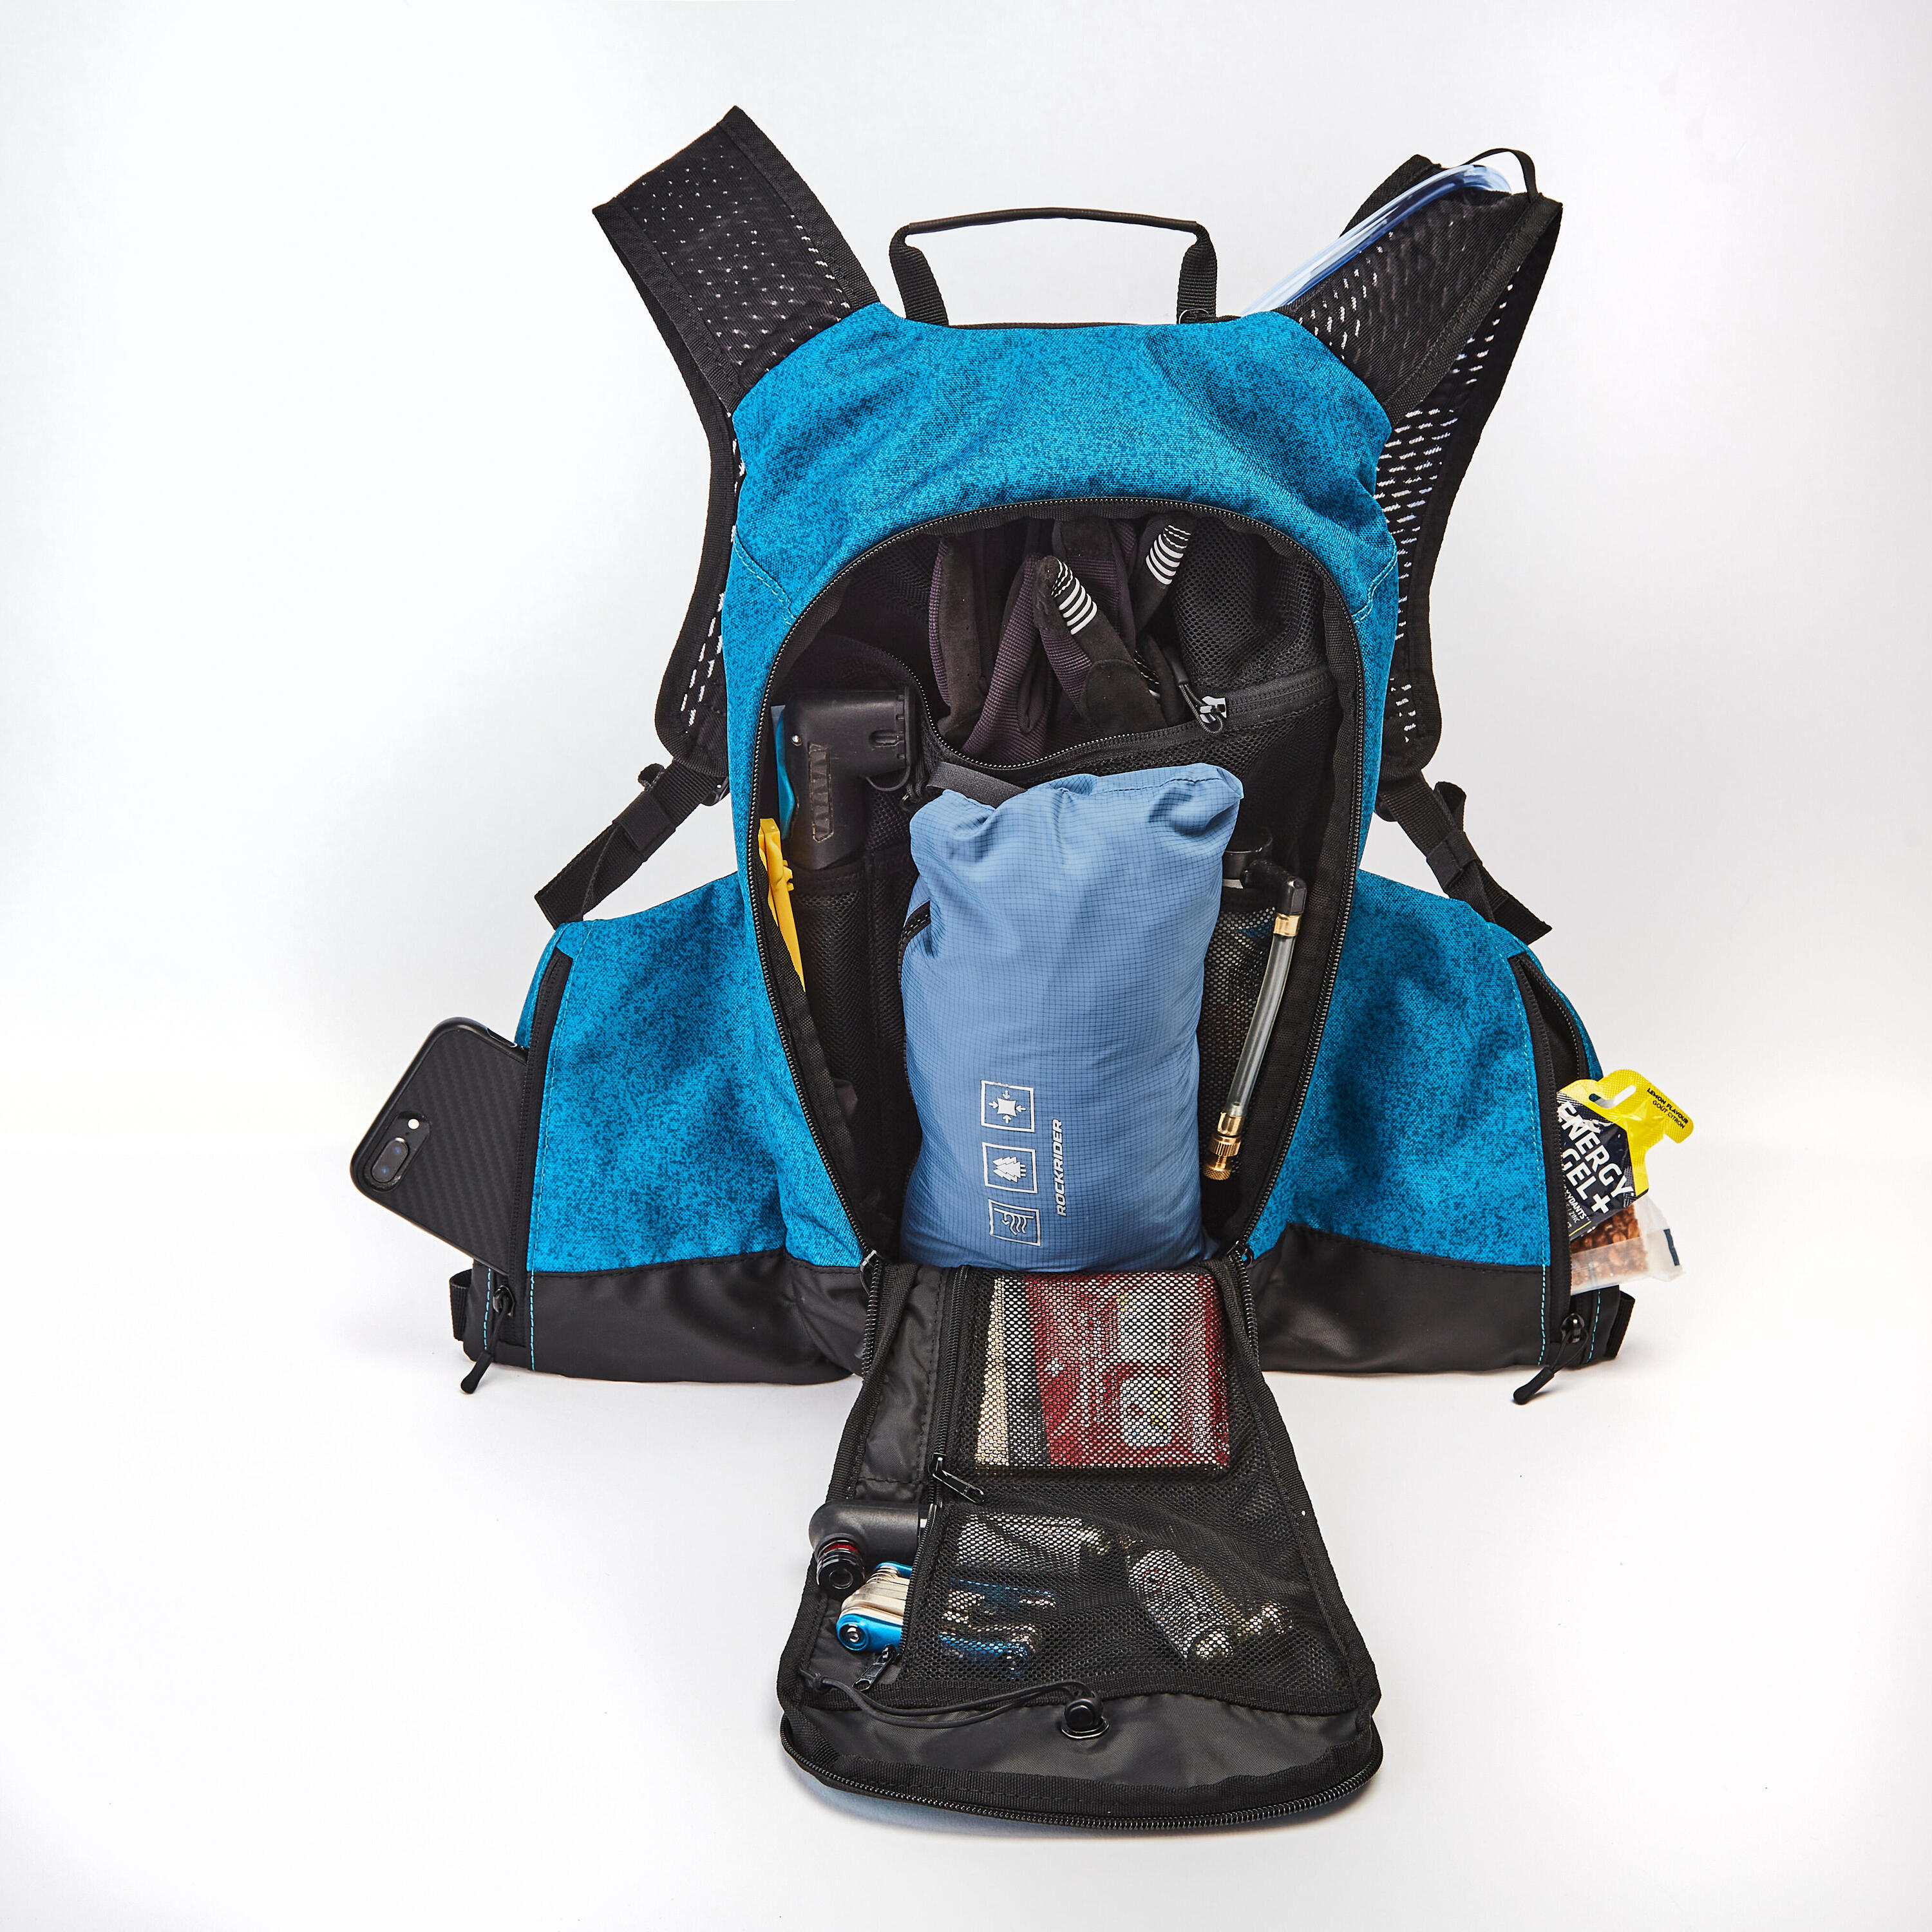 Mountain Bike Hydration Backpack Explore 7L/2L Water - Turquoise Blue 4/18